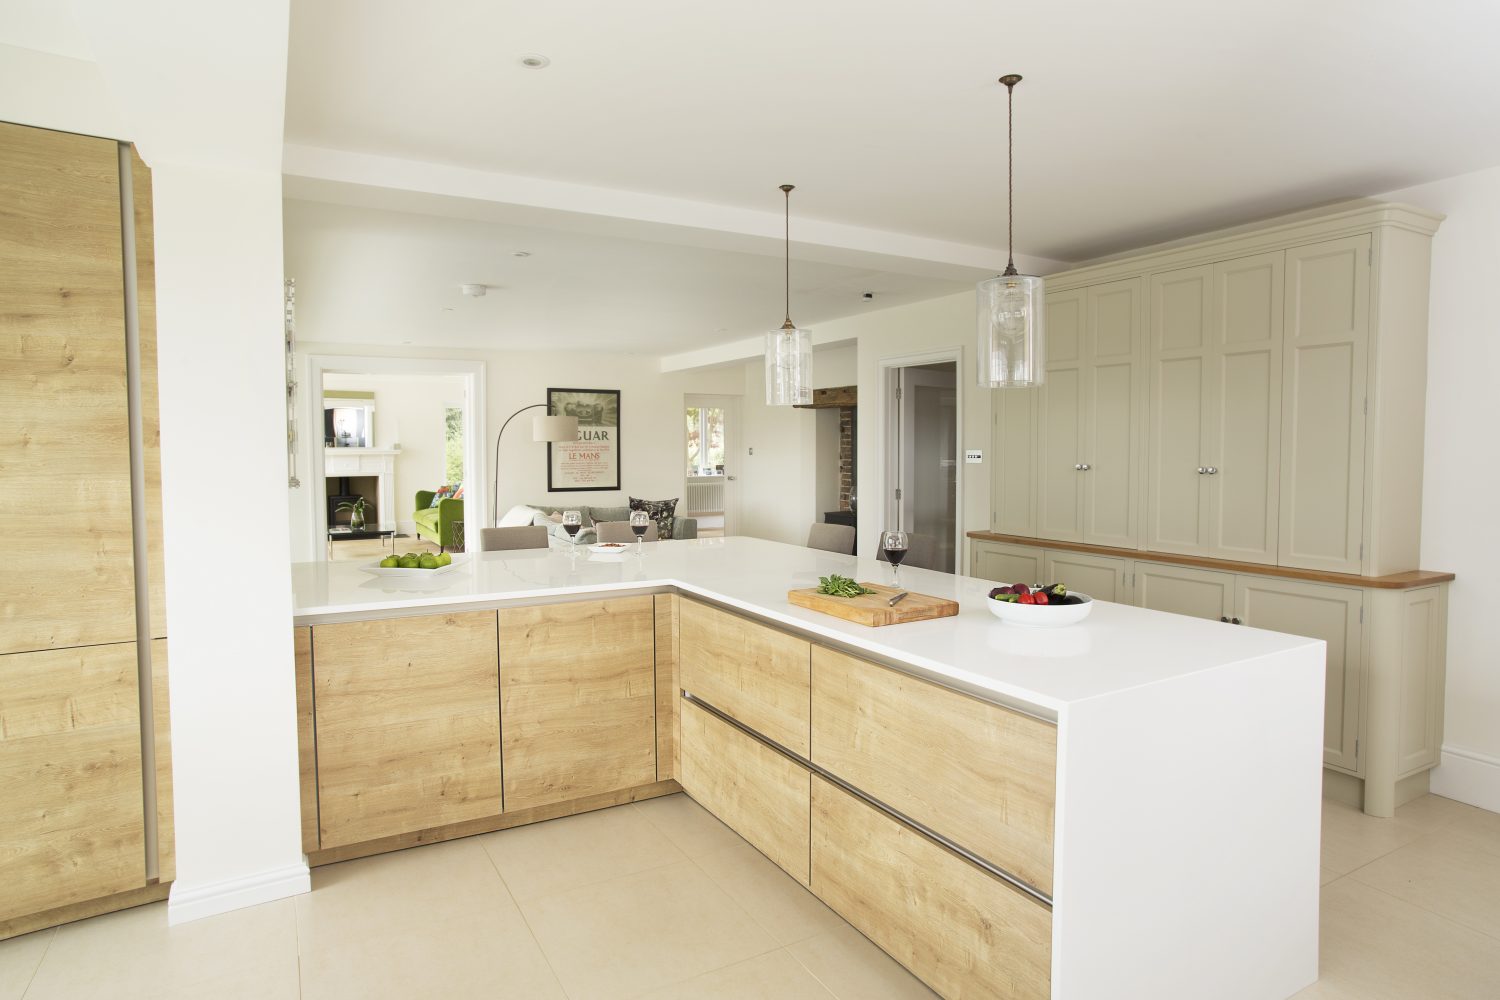 A bespoke combination of Rencraft handmade butler cupboards with a SieMatic island. Rencraft / SieMatic by Rencraft kitchen cabinetry starts from approx. £25,000 01892 520730 rencraft.co.uk